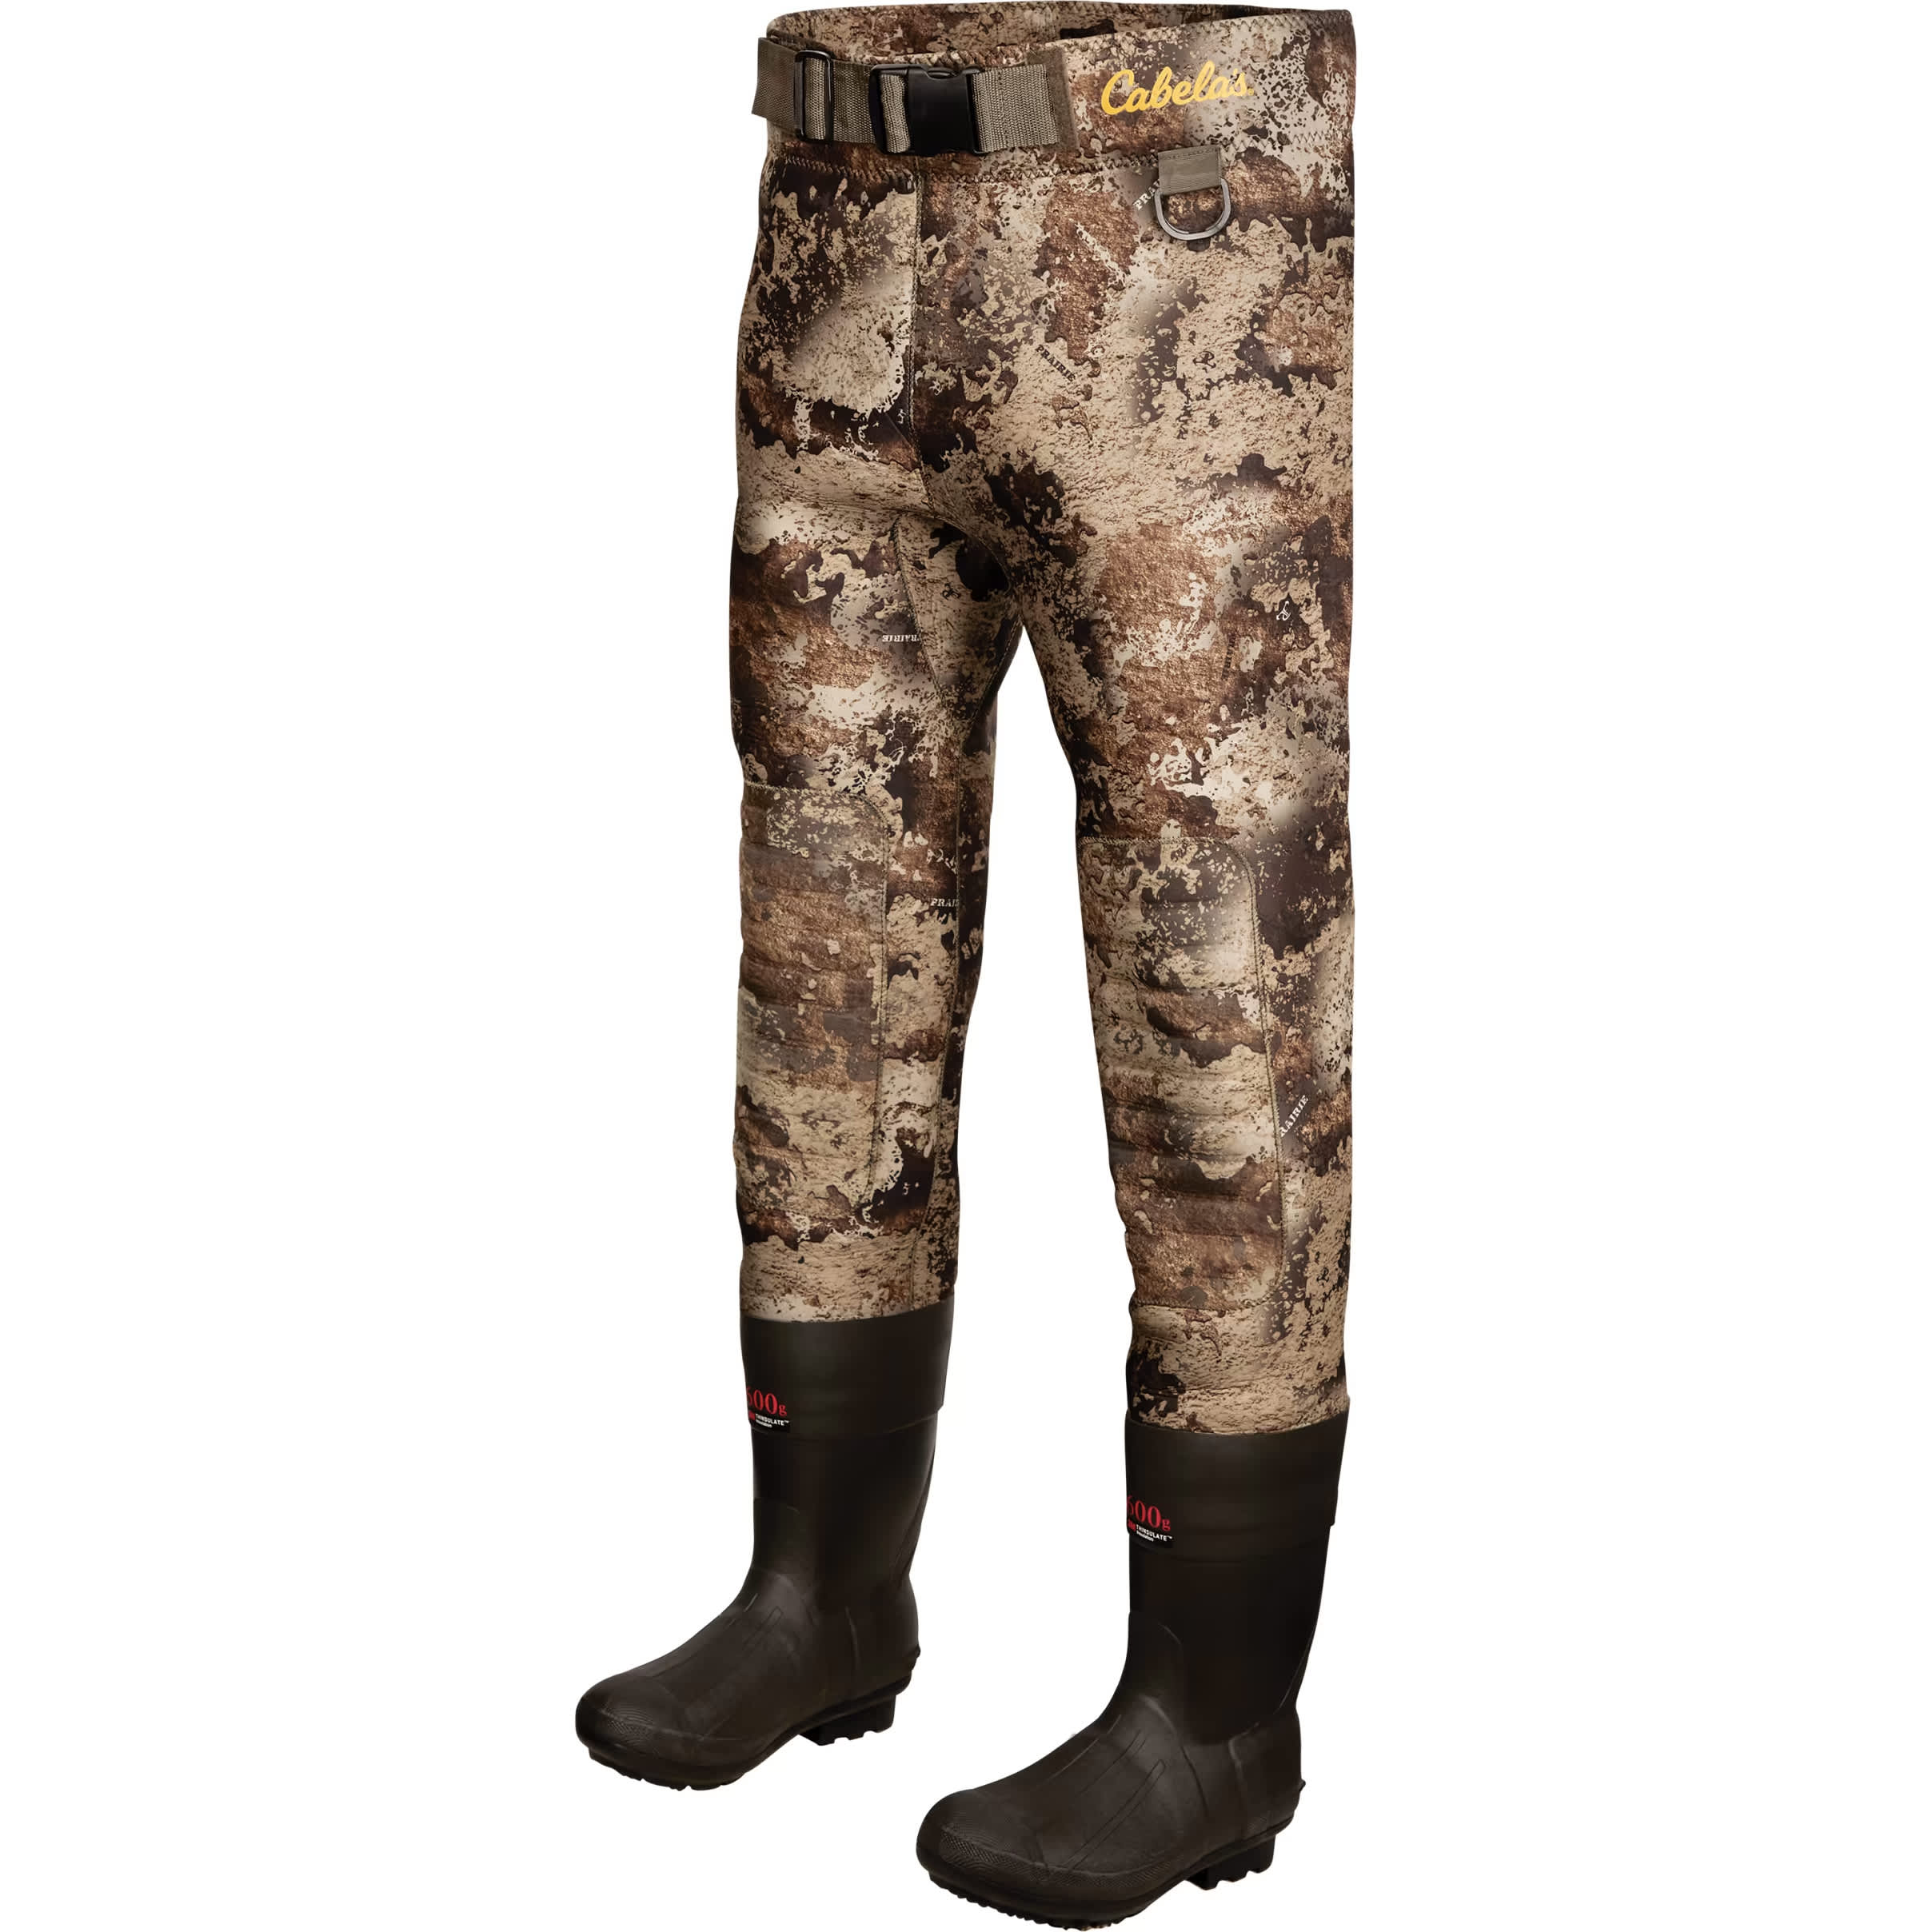 Cabela’s Men’s Classic 3.5mm Waist High Hunting Waders - Cabelas 